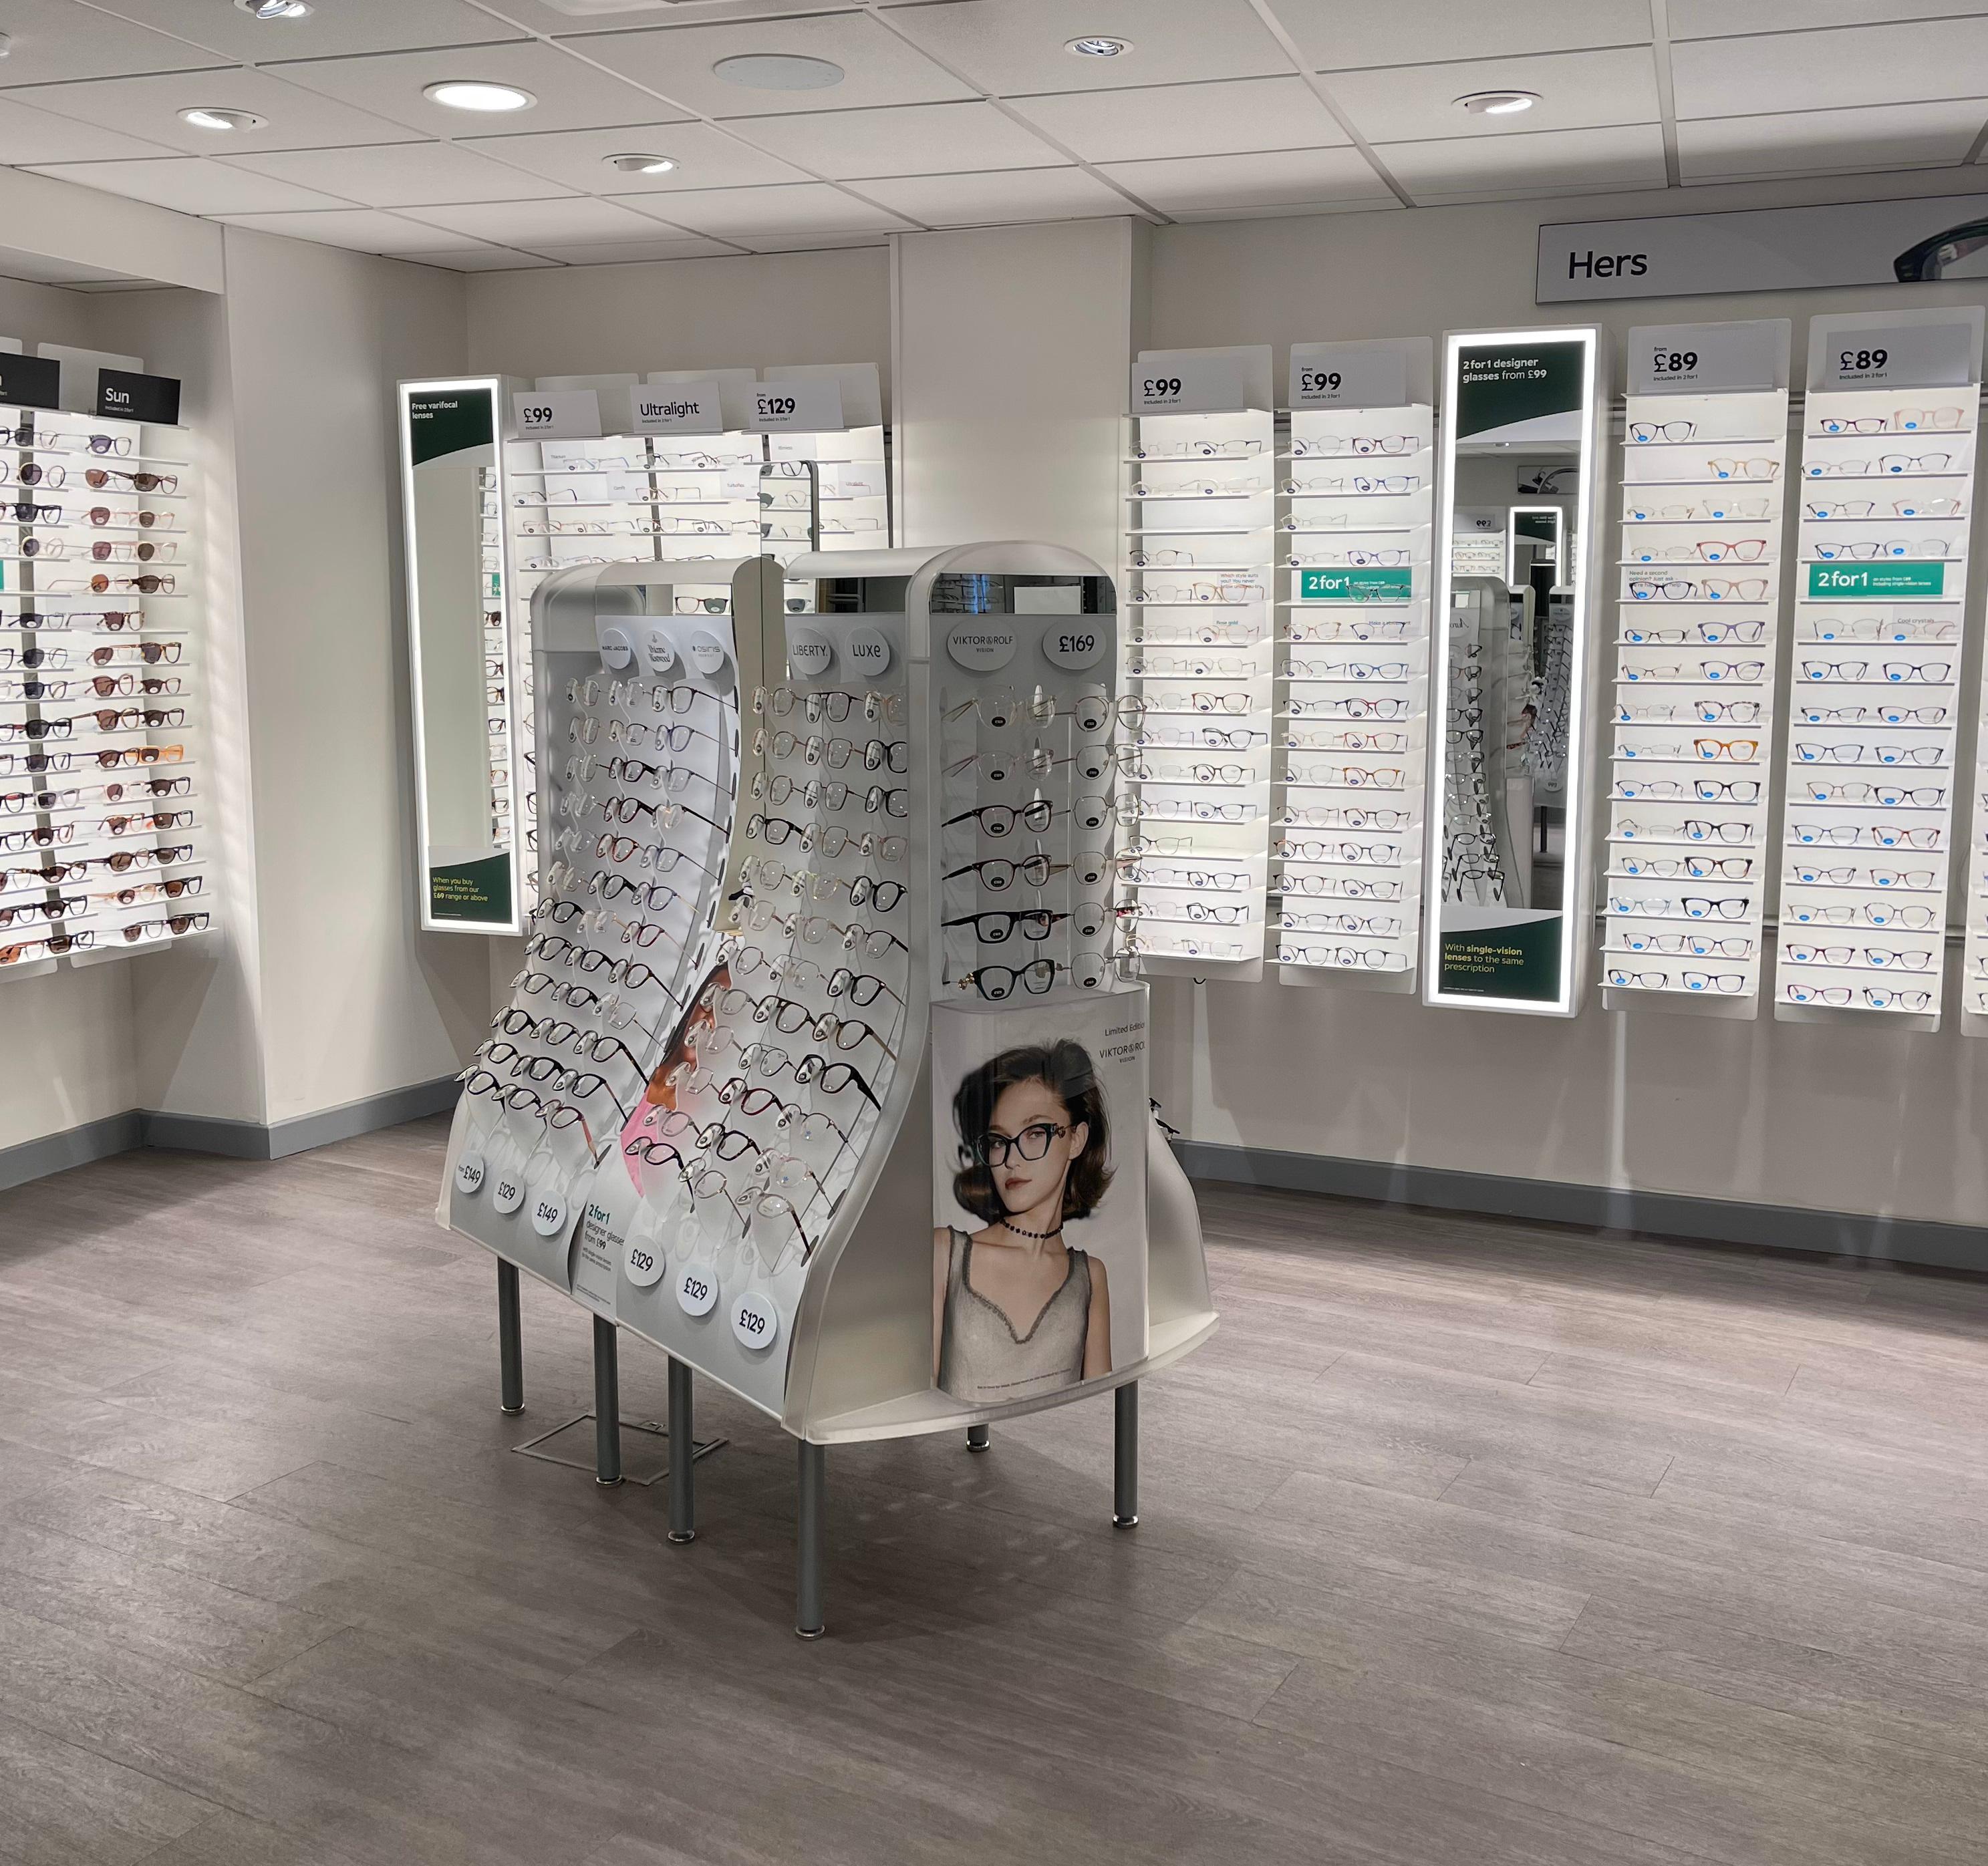 Images Specsavers Opticians and Audiologists - Melton Mowbray